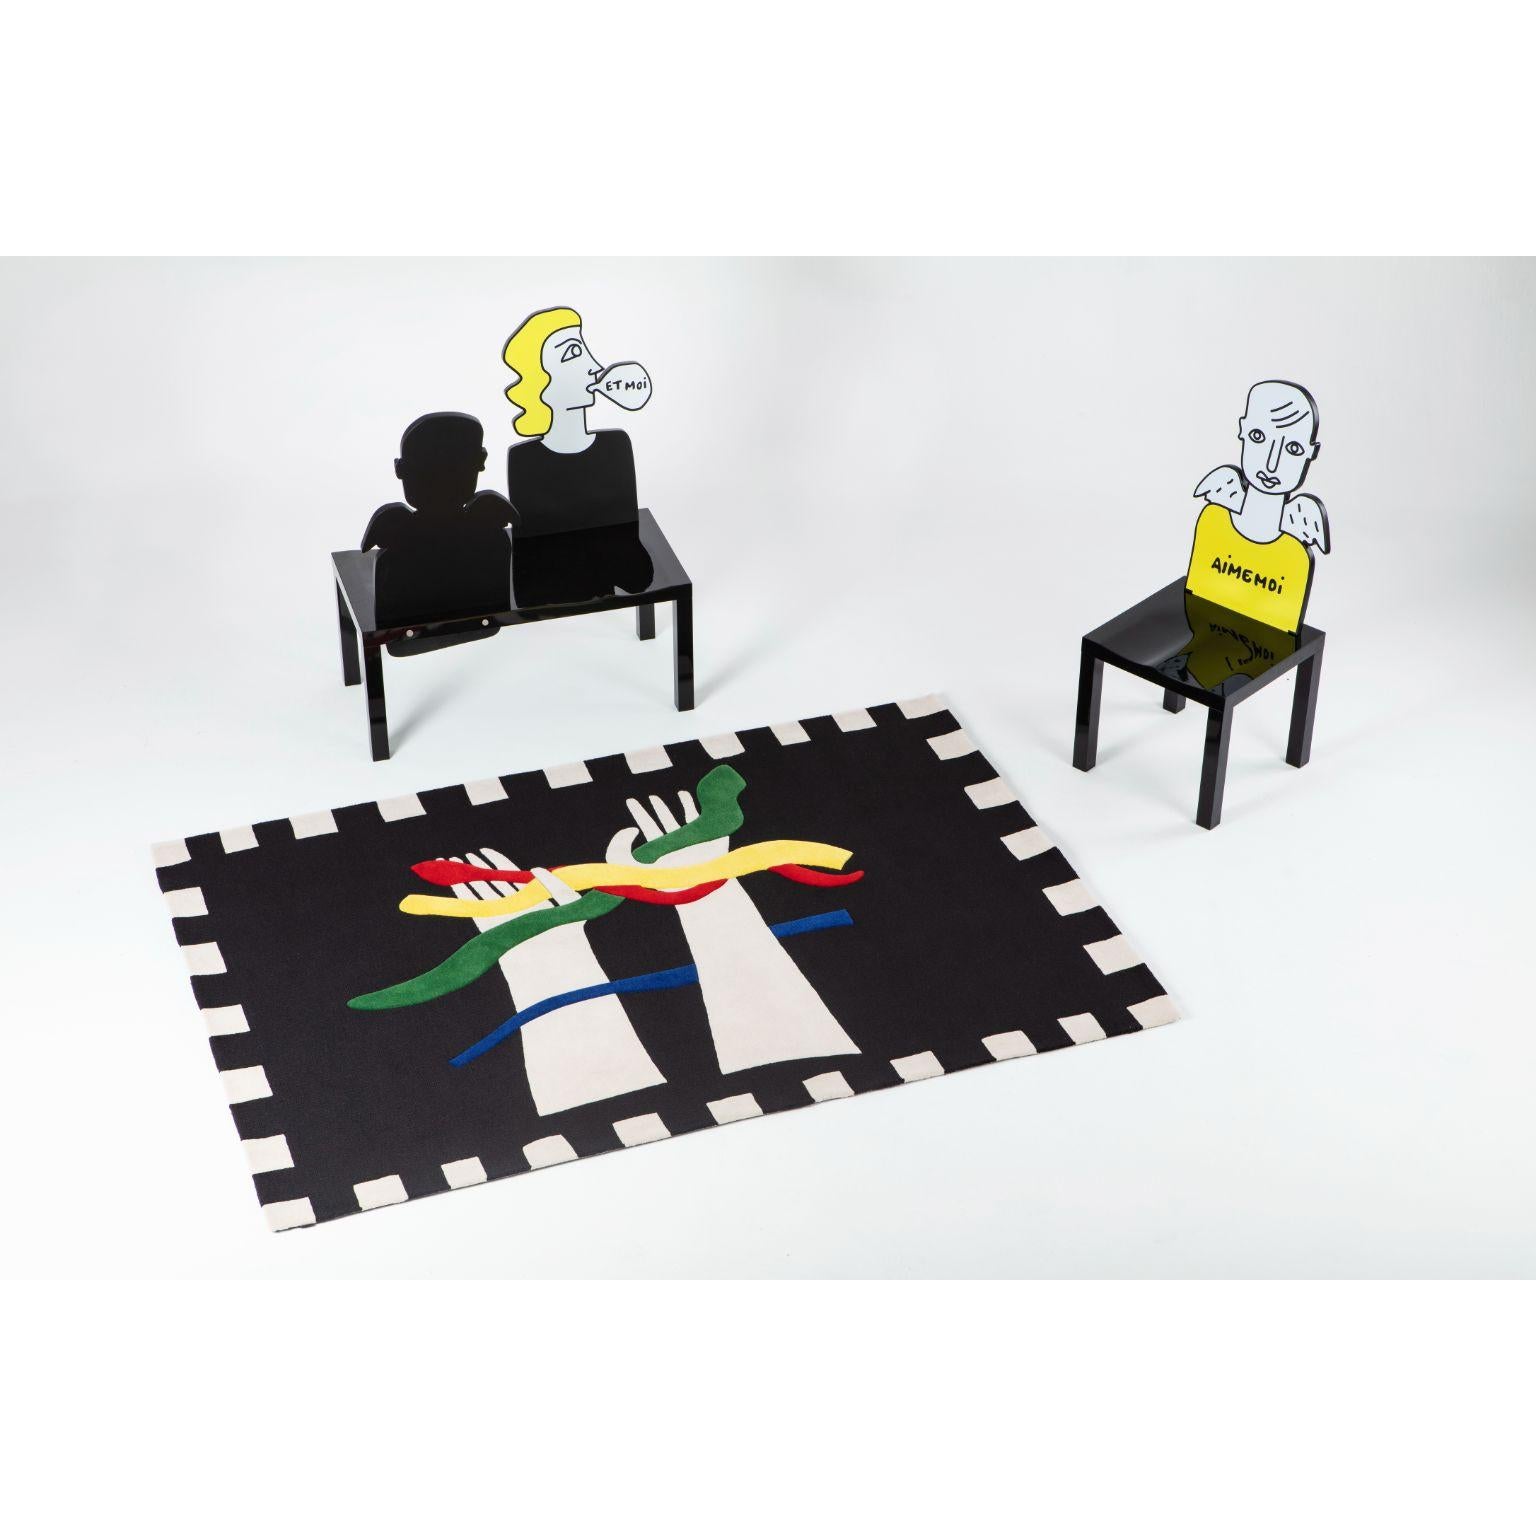 Mano Chrome Rug by Jean-Charles de Castelbajac In New Condition For Sale In Geneve, CH